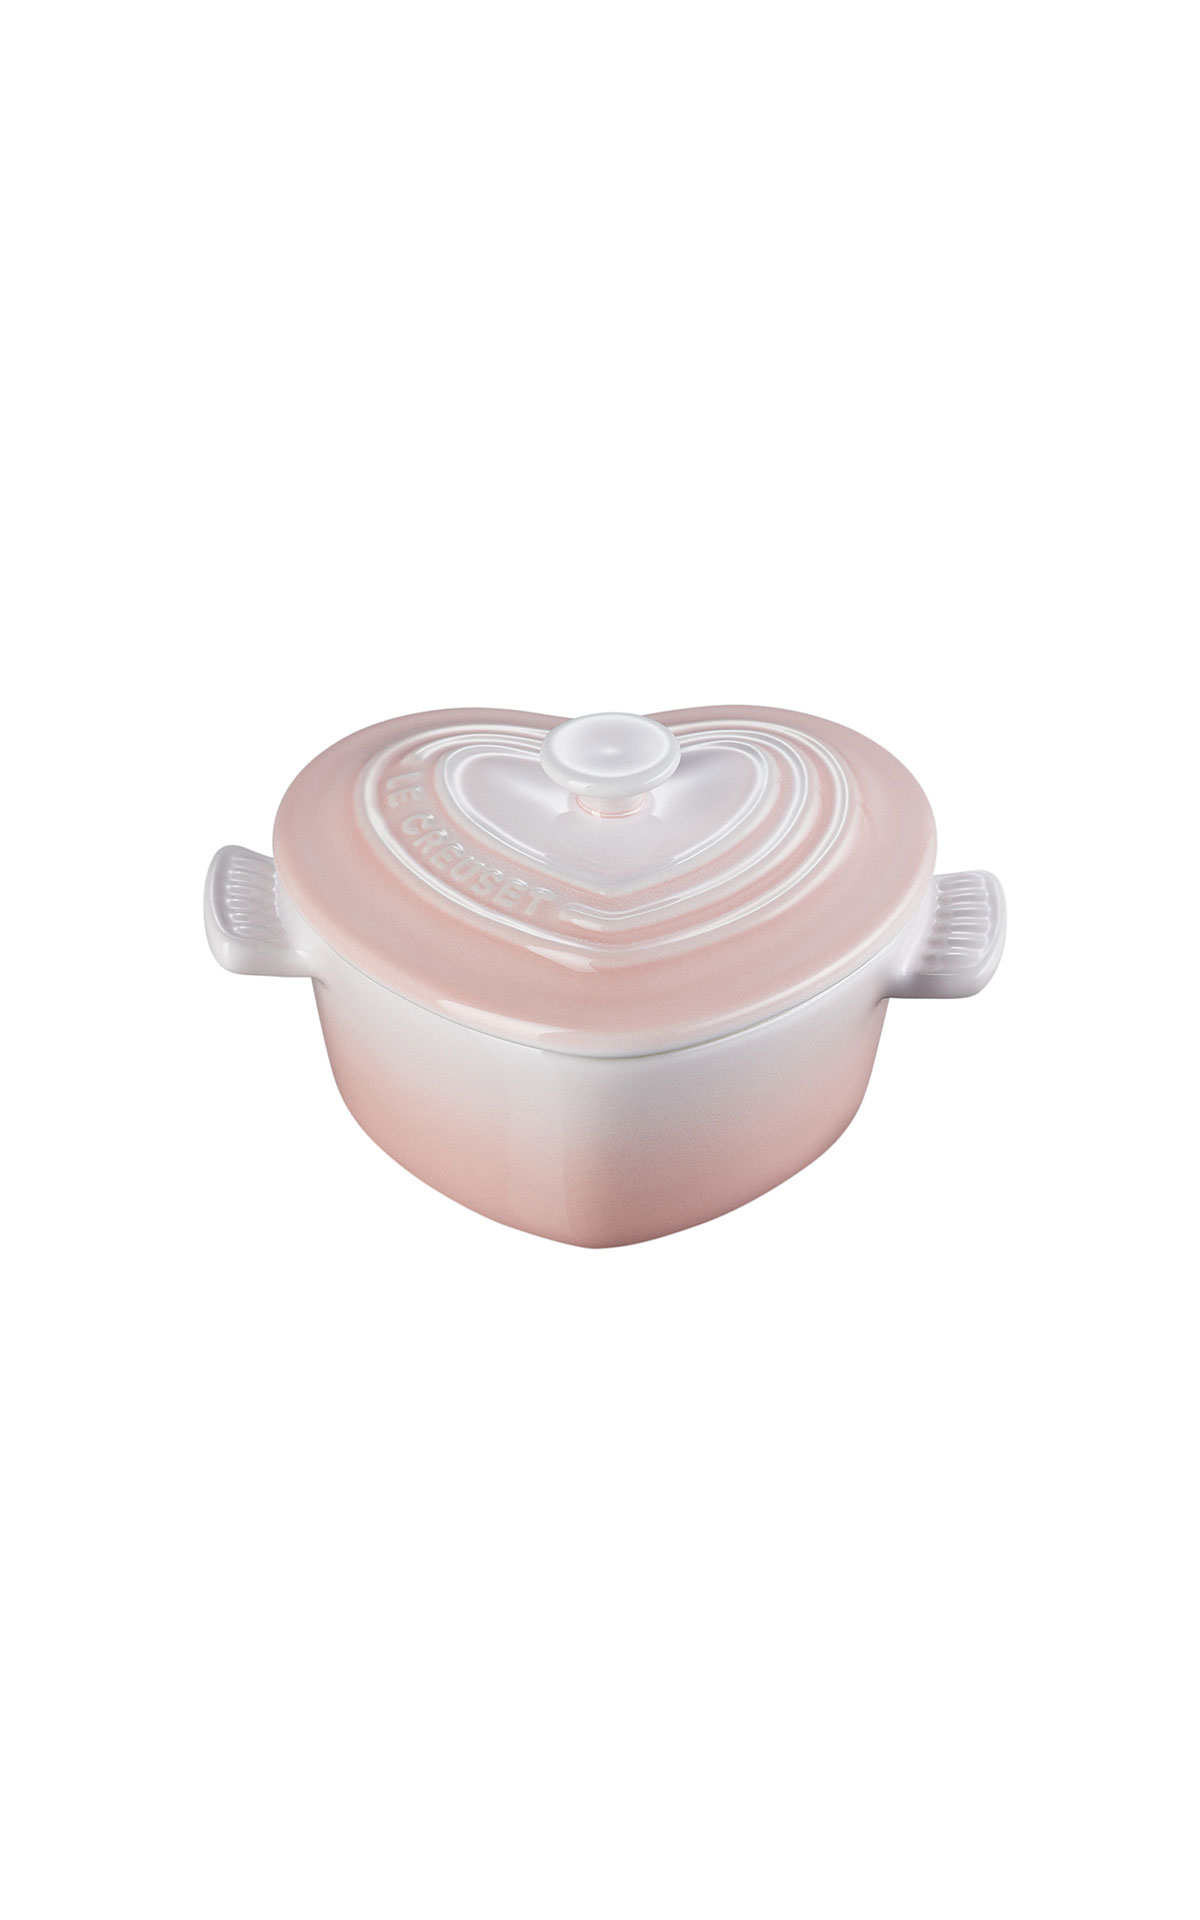 Le Creuset Mini cocotte d'amour shell pink from Bicester Village